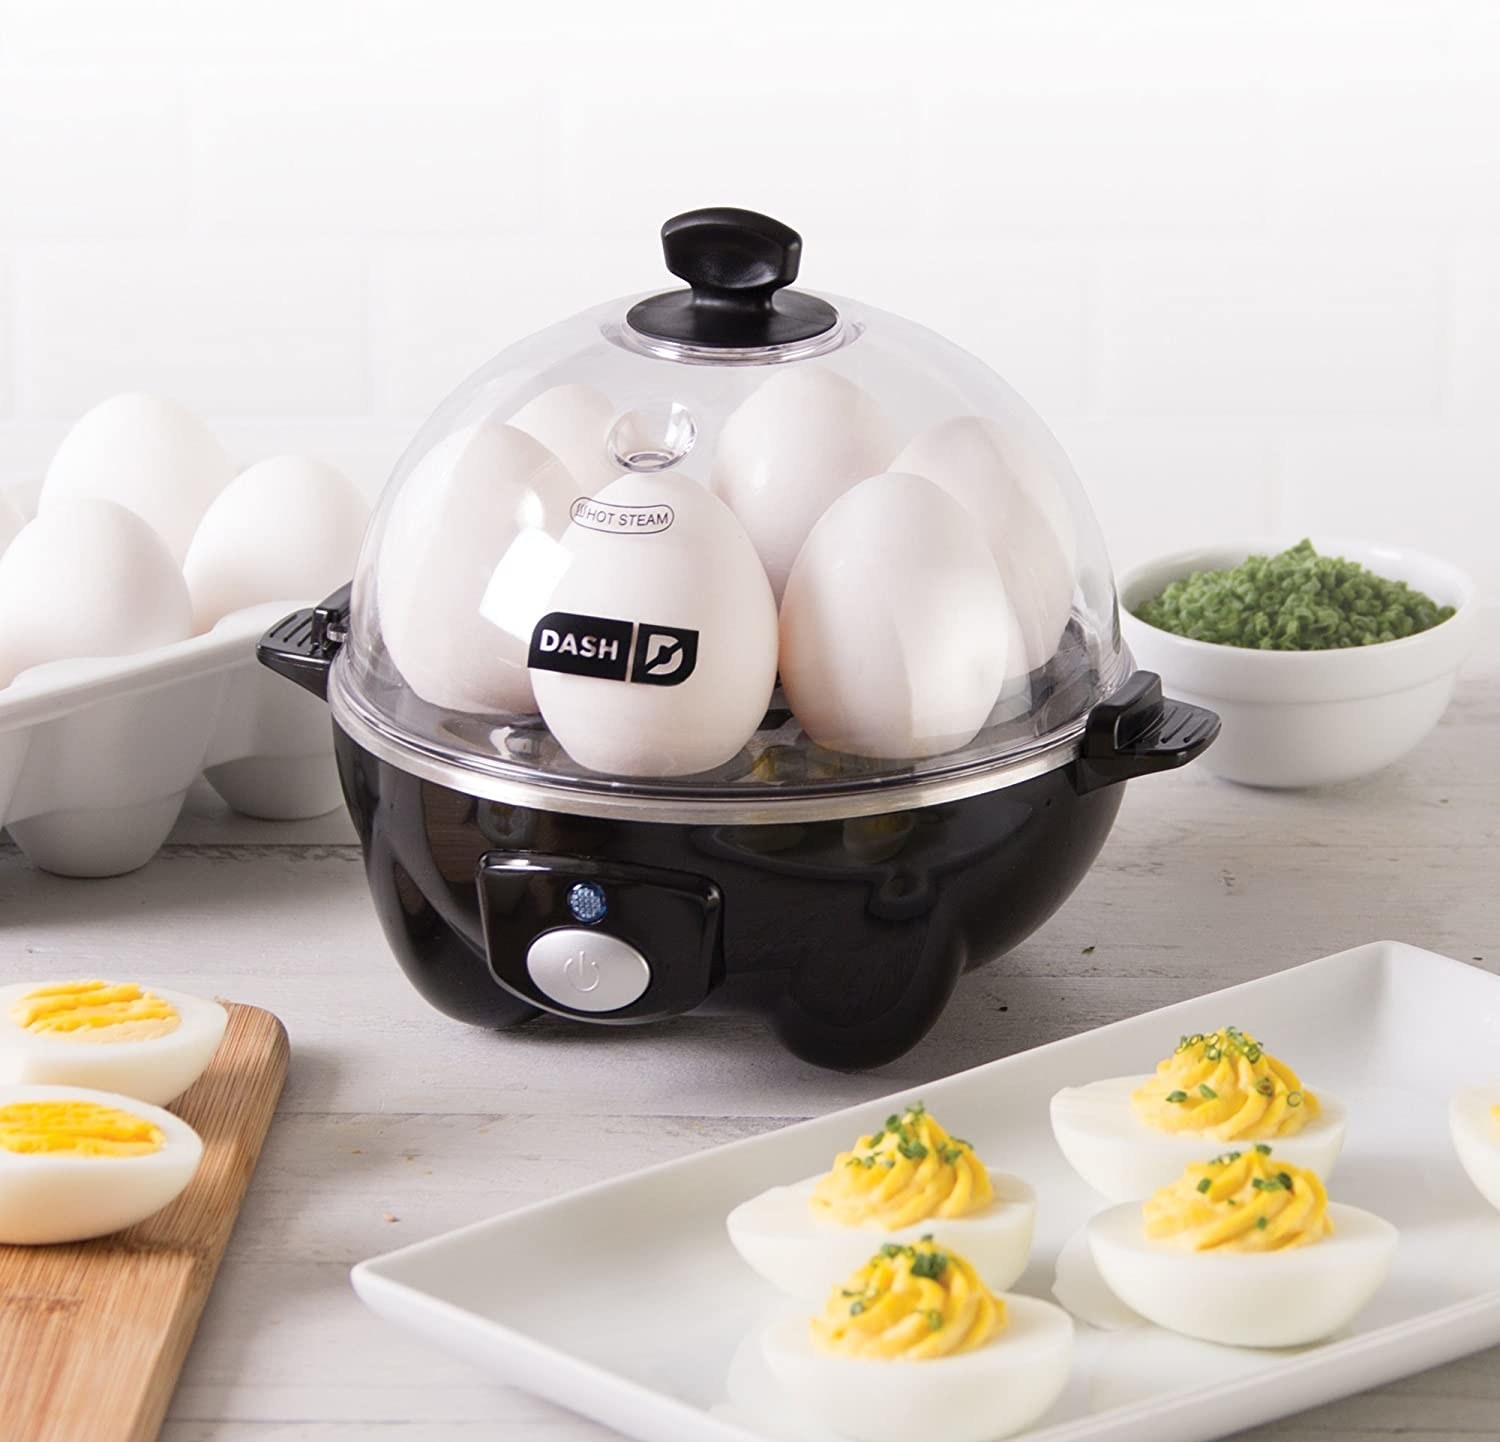 The egg cooker in black filled with six eggs